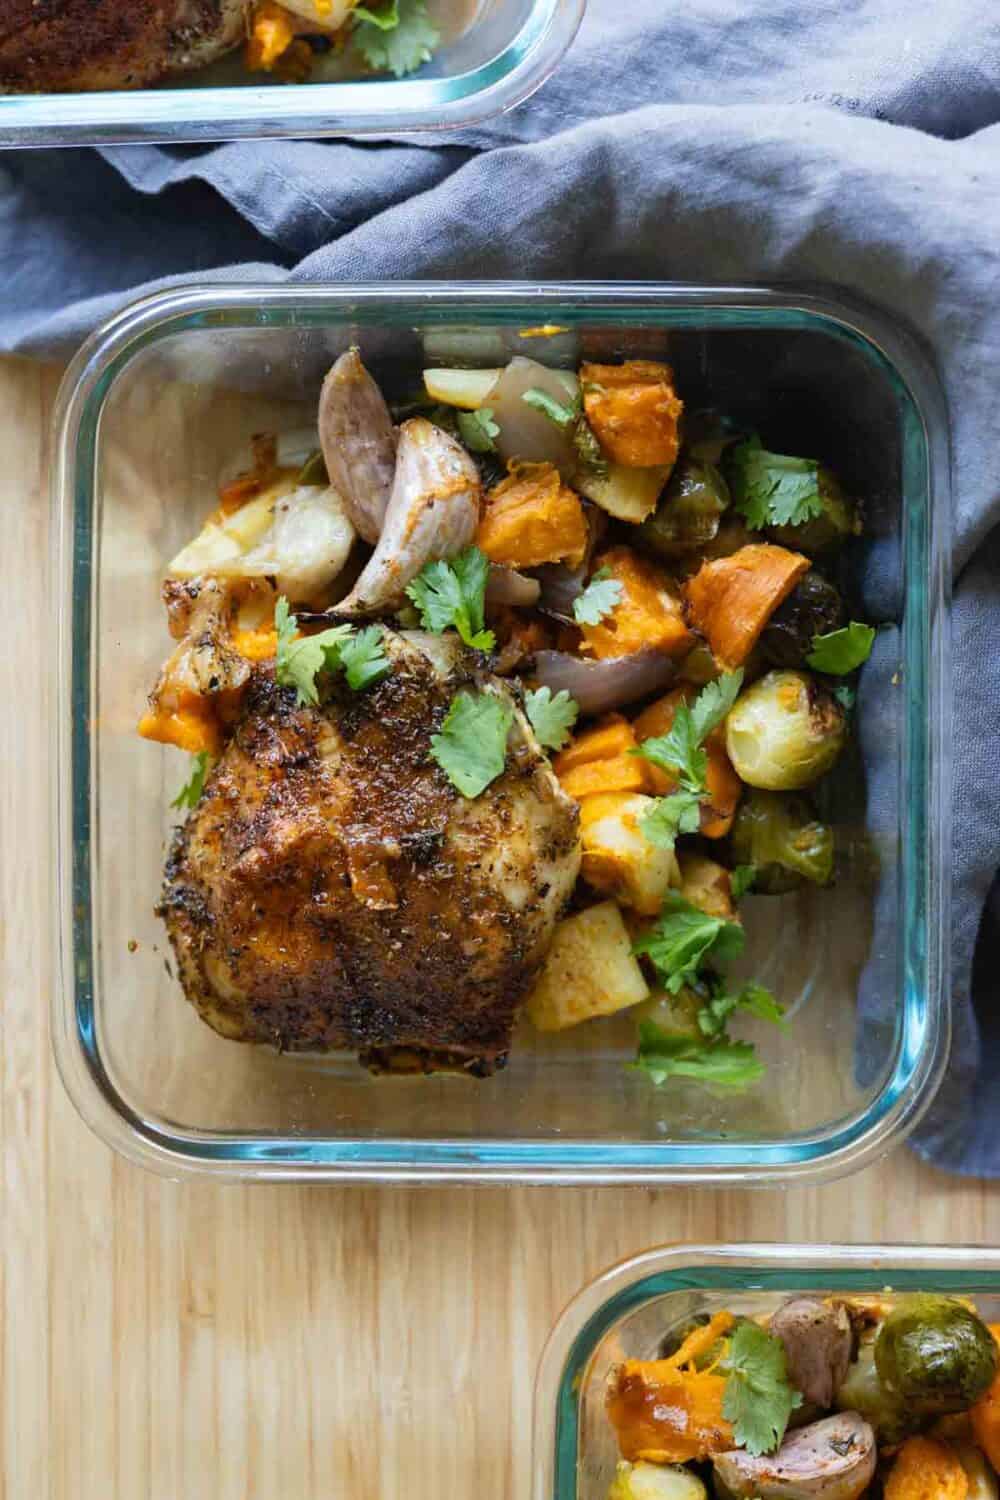 Chicken Thigh on top of root vegetables in a square glass container.